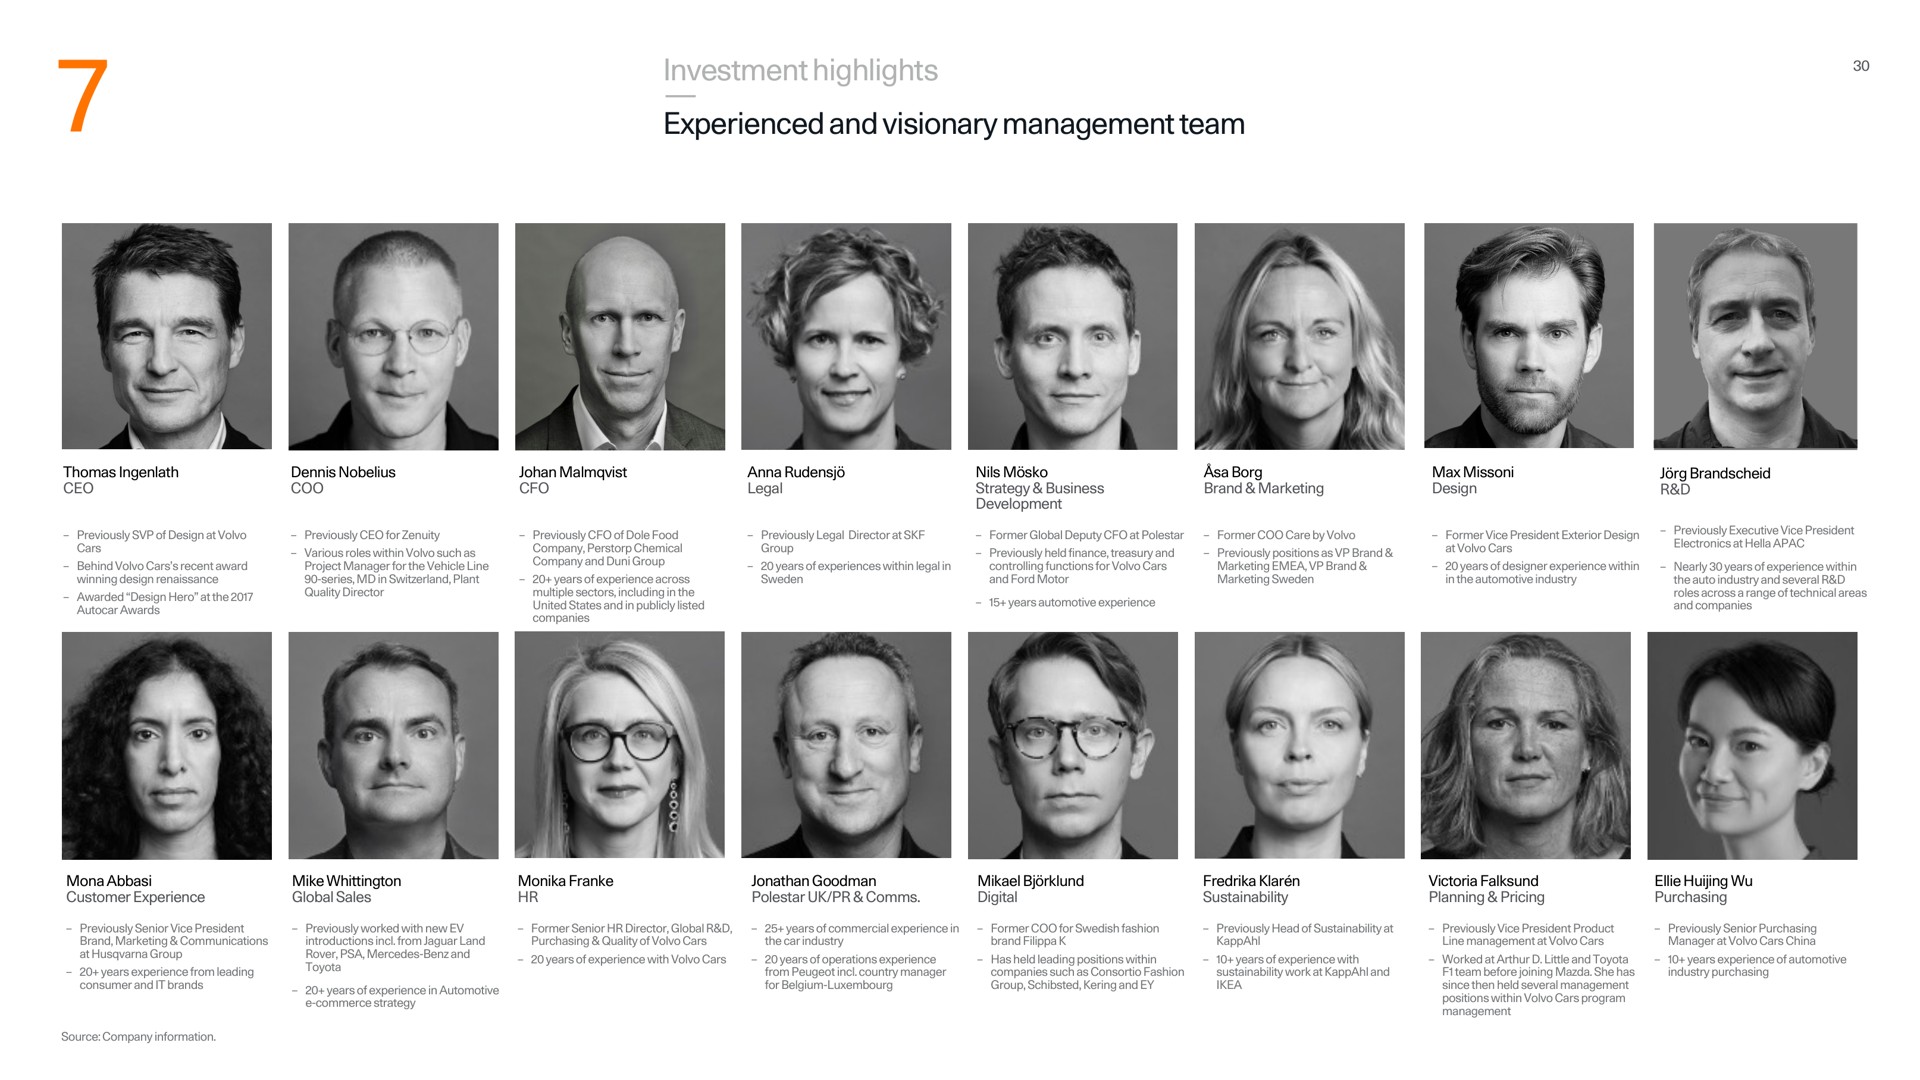 investment highlights experienced and visionary management team | Polestar